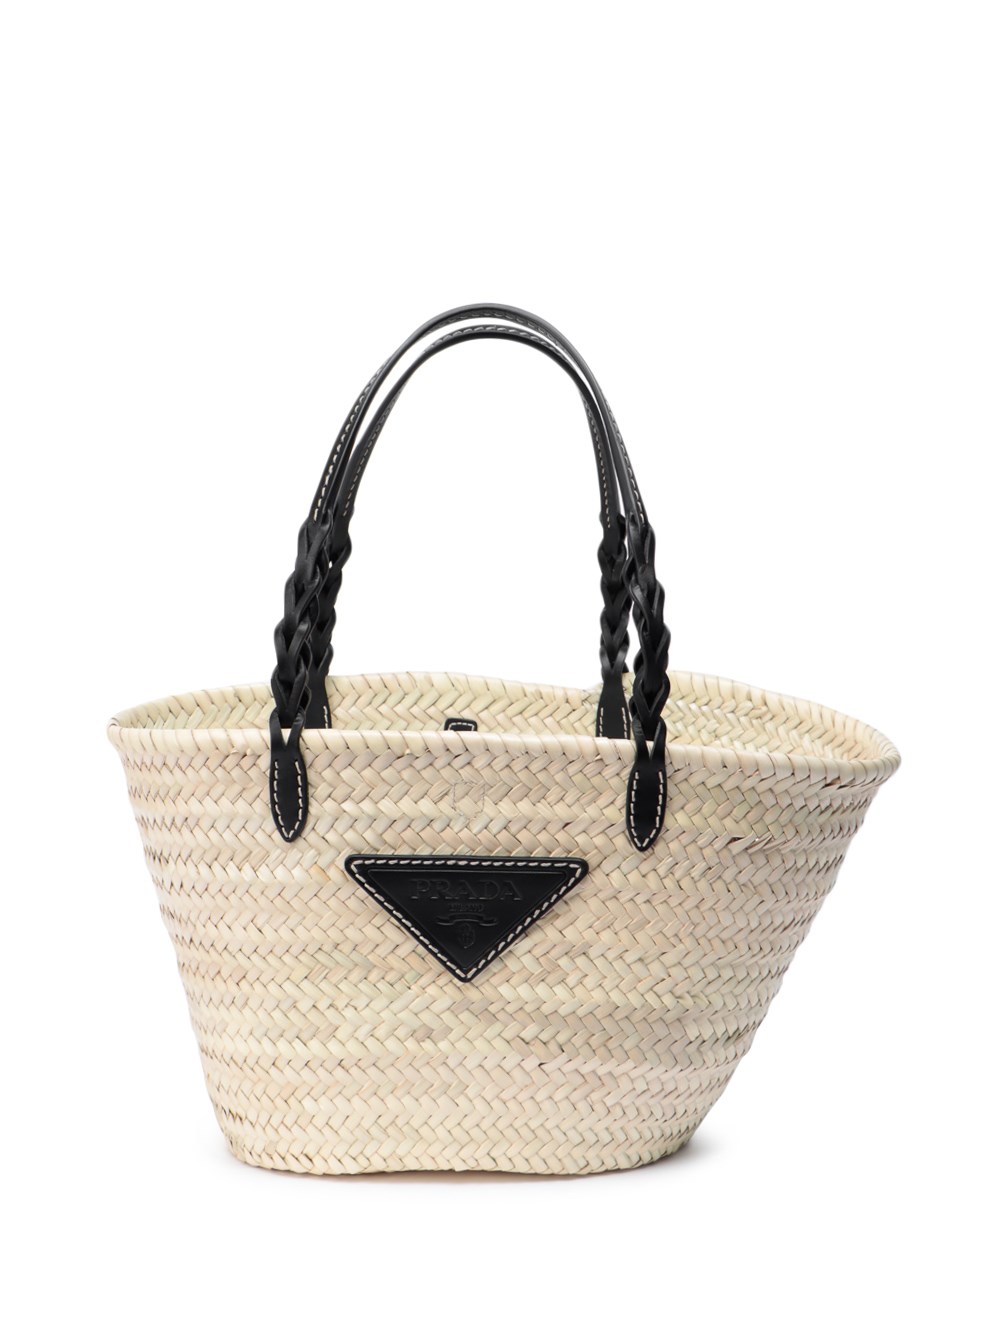 Prada Woven Palm And Leather Tote In Beige | ModeSens